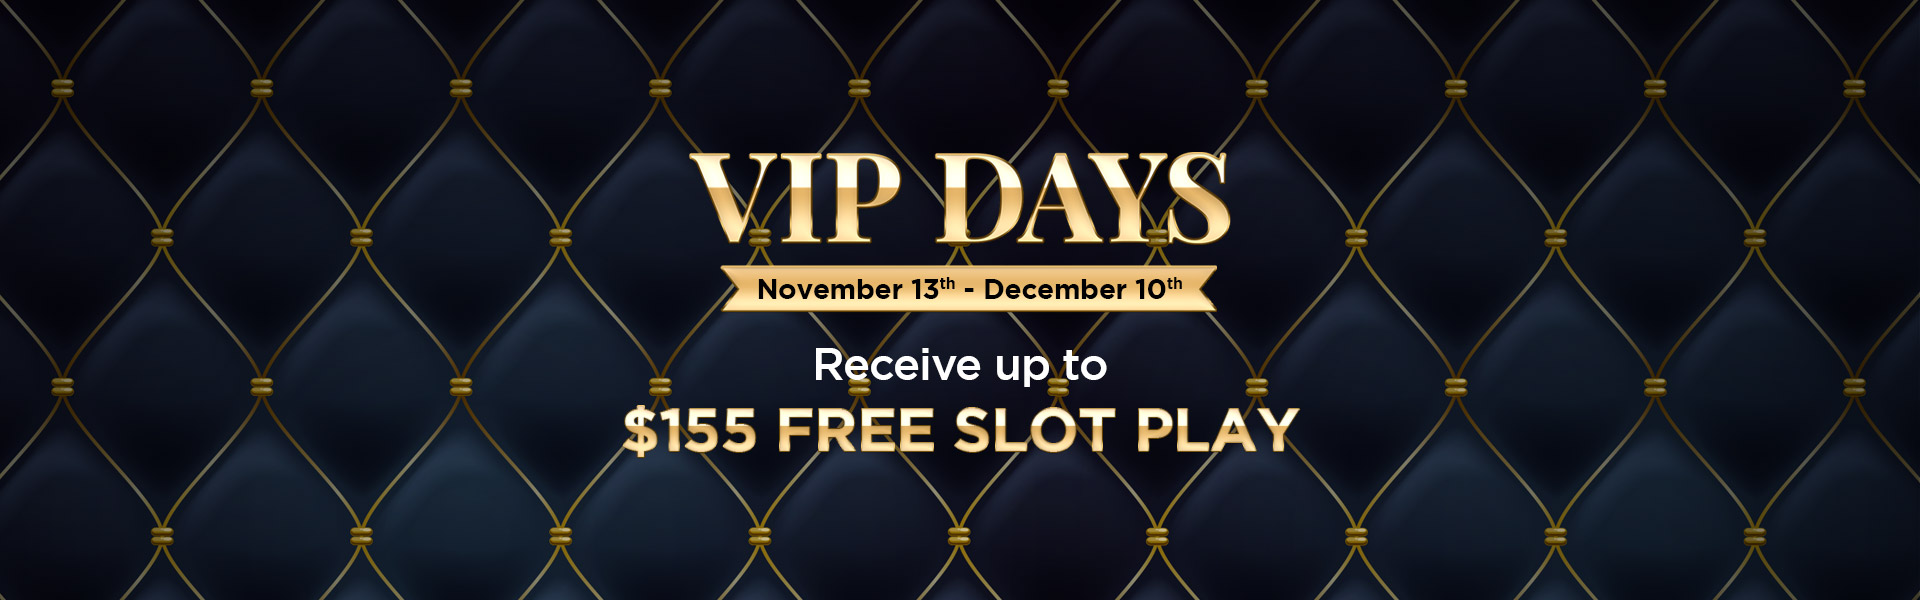 VIP-Days-Promo-Page-Banner